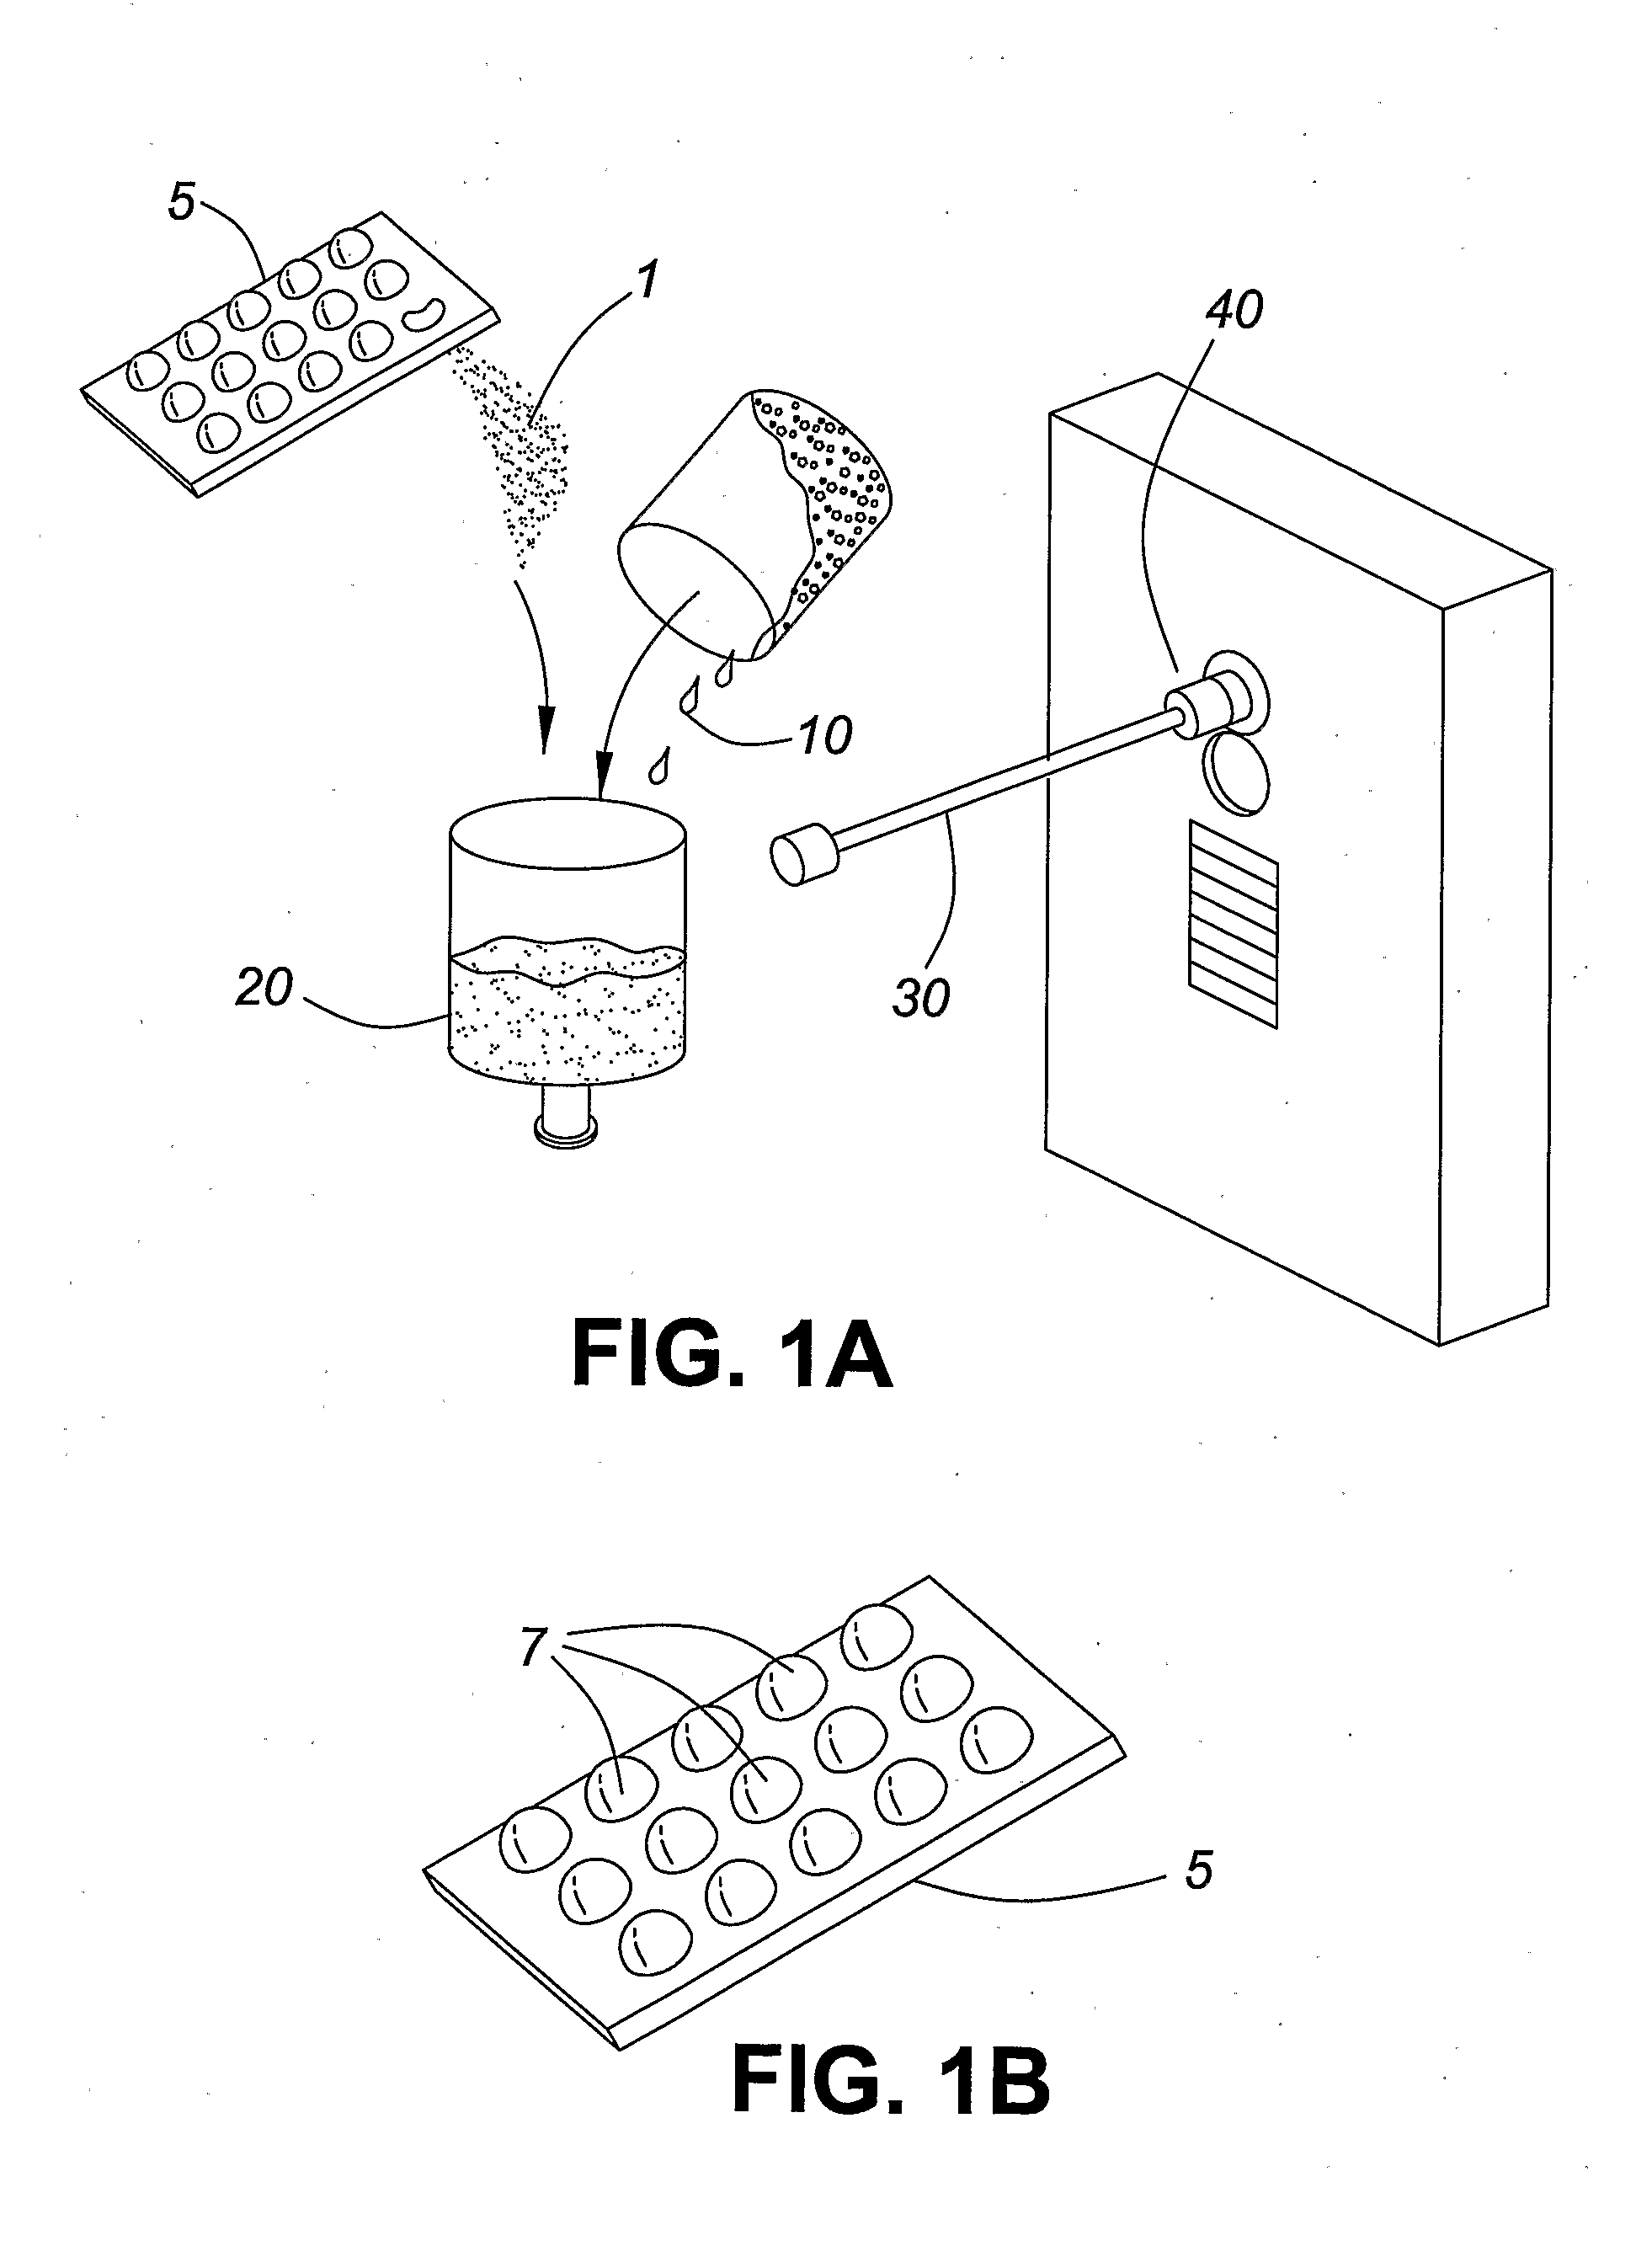 Method for Administering Formoterol Using a Nebulizer